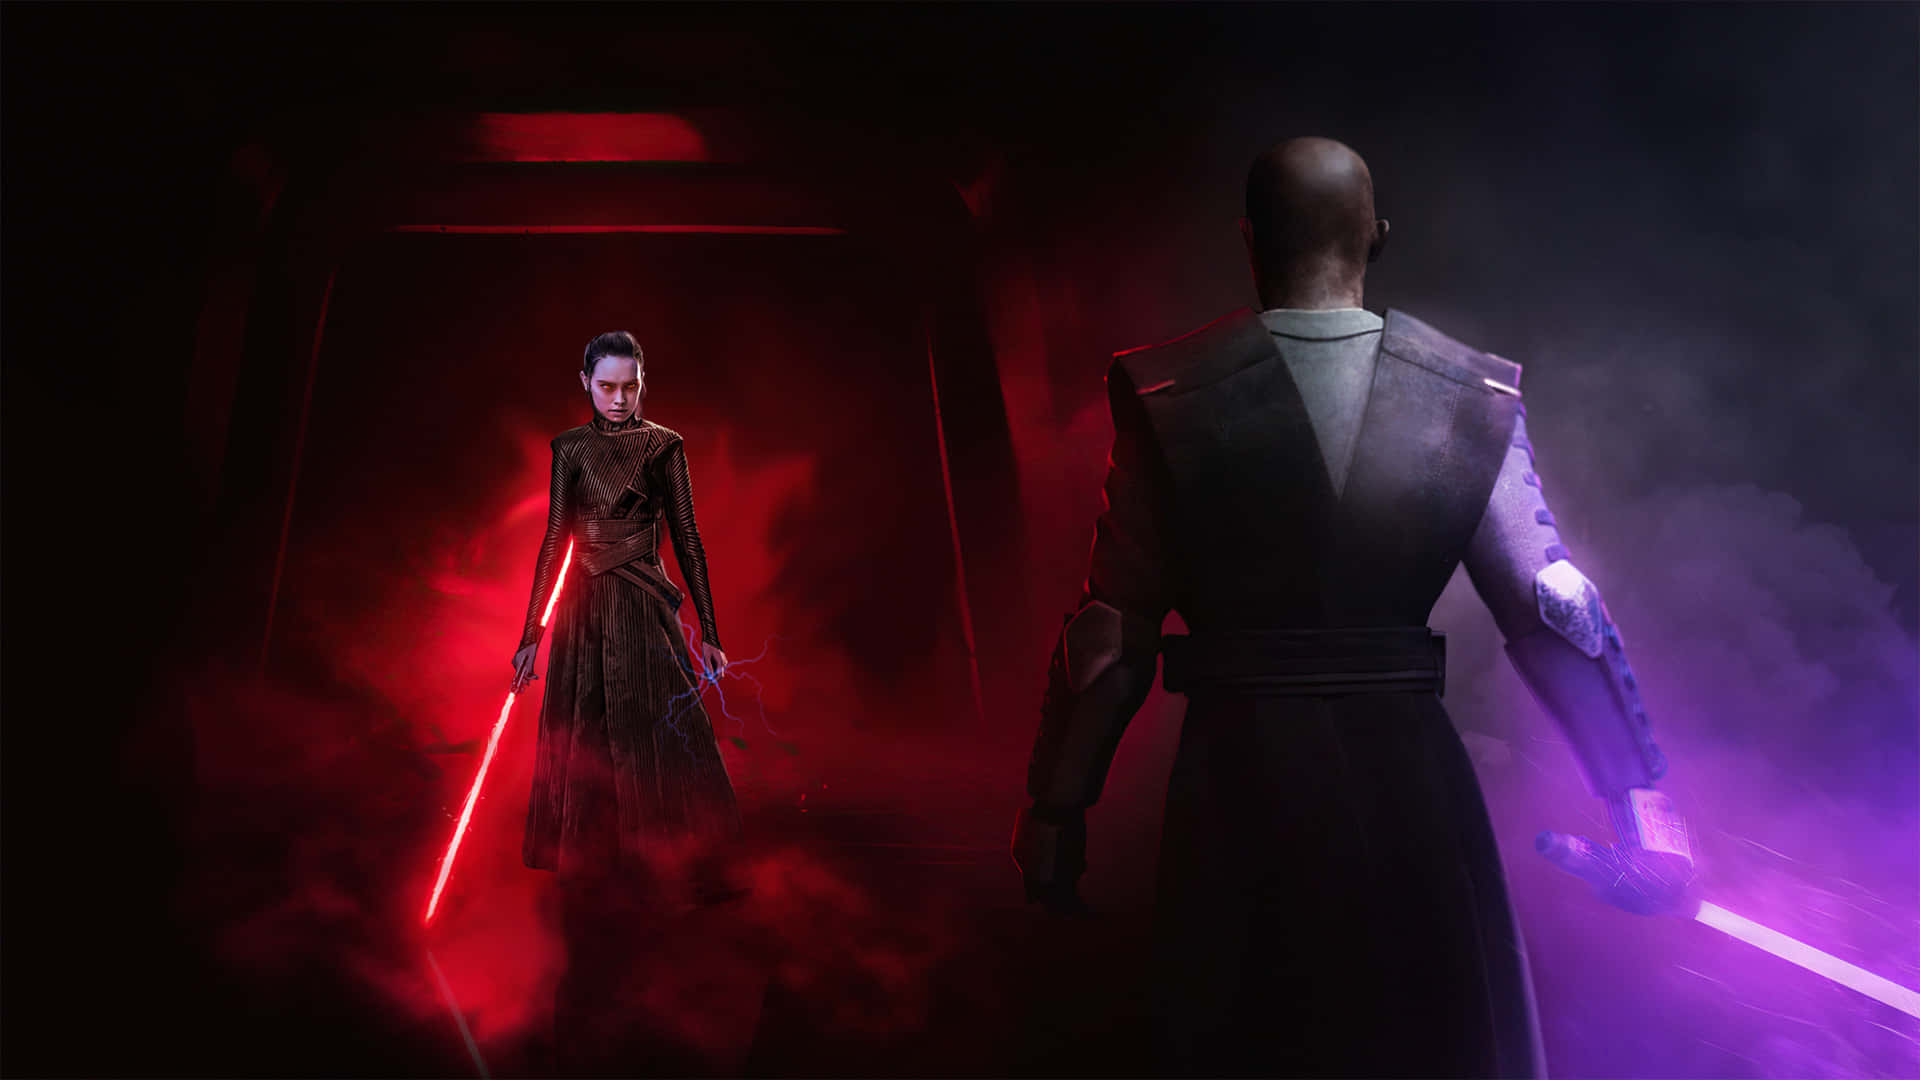 A menacing Sith Lord stands in the shadows Wallpaper